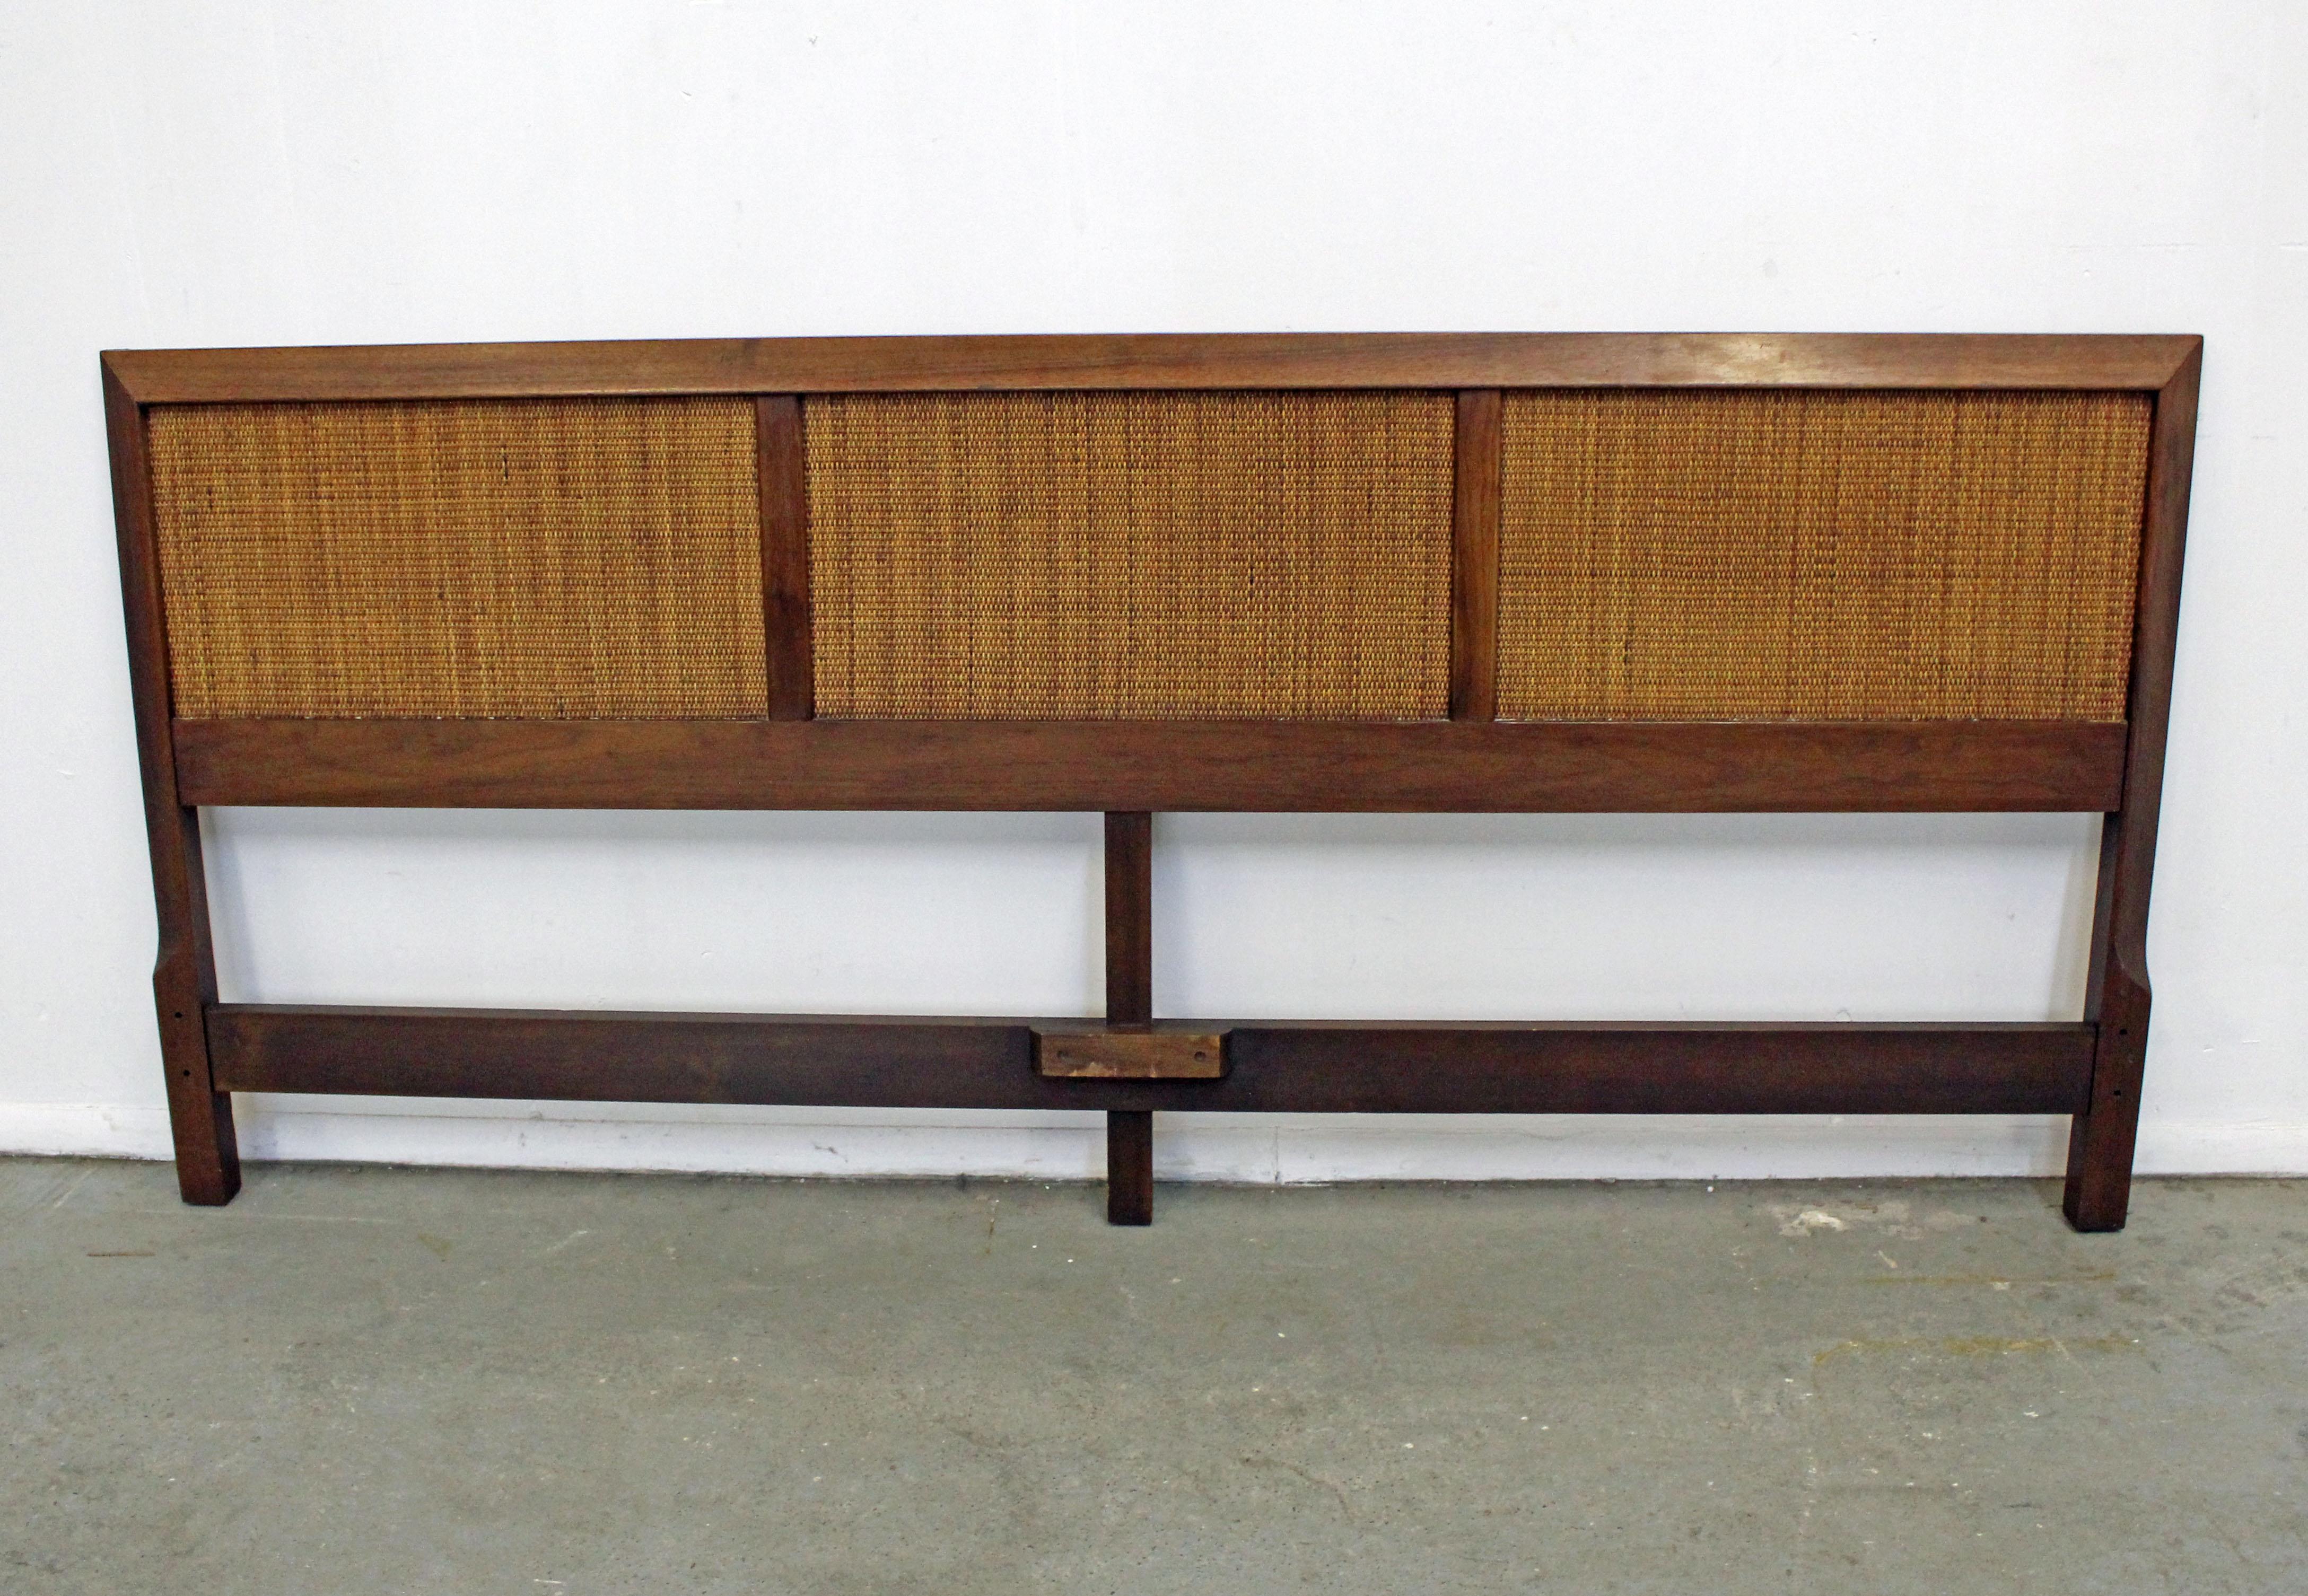 Offered is a vintage mid-century walnut and cane king-size headboard similar to the style of John Stuart. It is in good condition, shows slight age wear (surface scratches/chips-see pictures). It is not signed. See our other listings for more